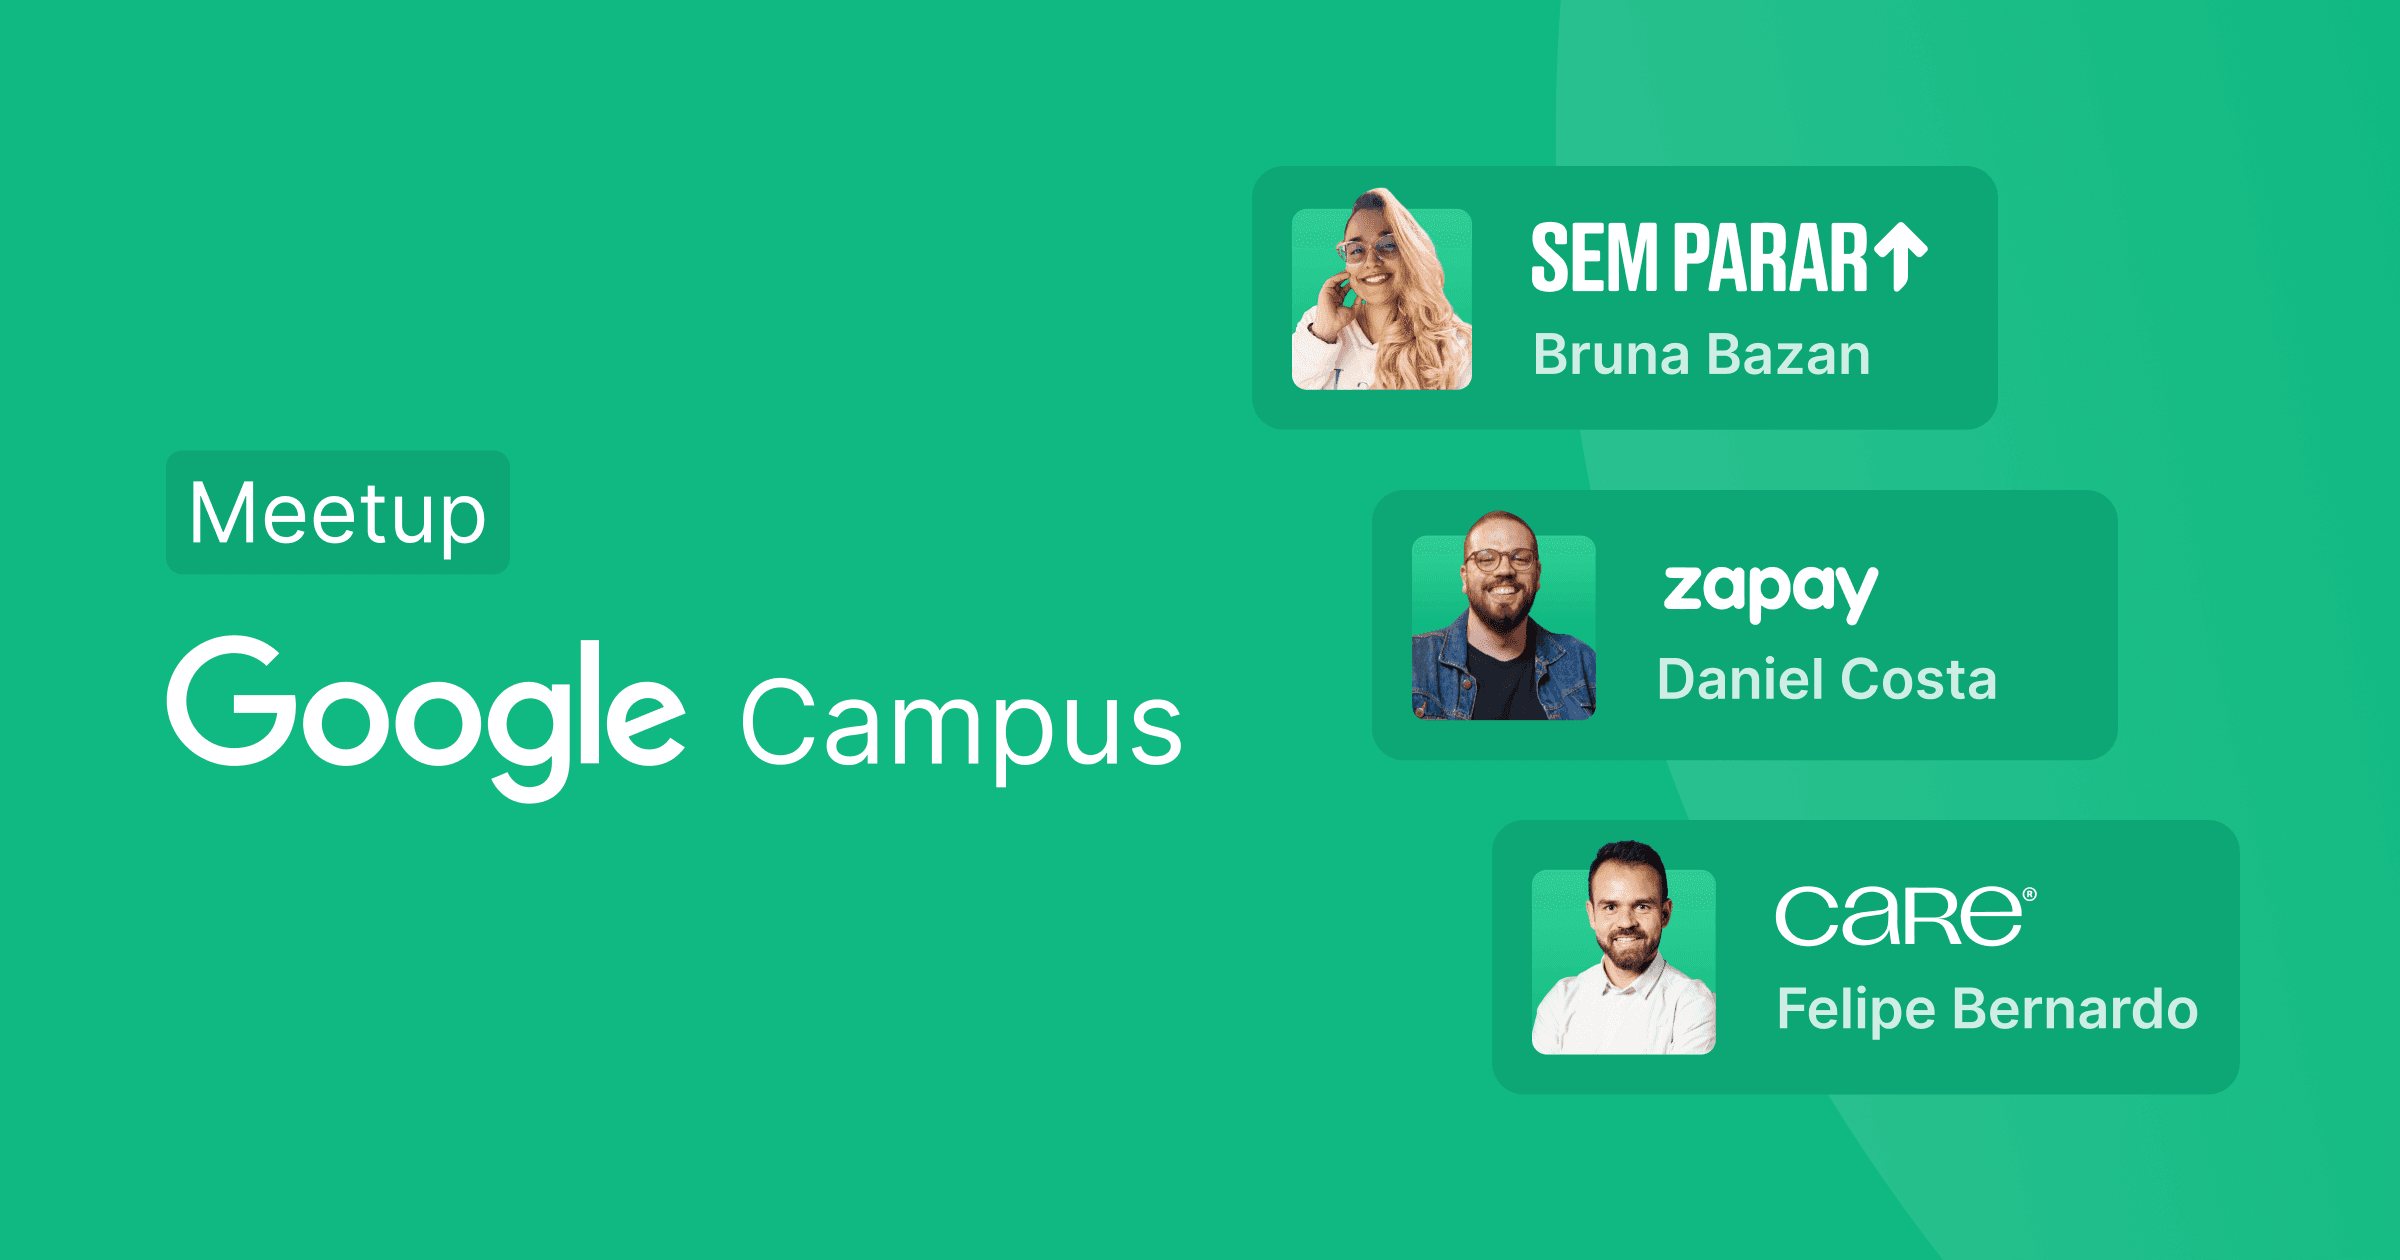 Google Campus Meet up blog cover with our clients' portraits and logos